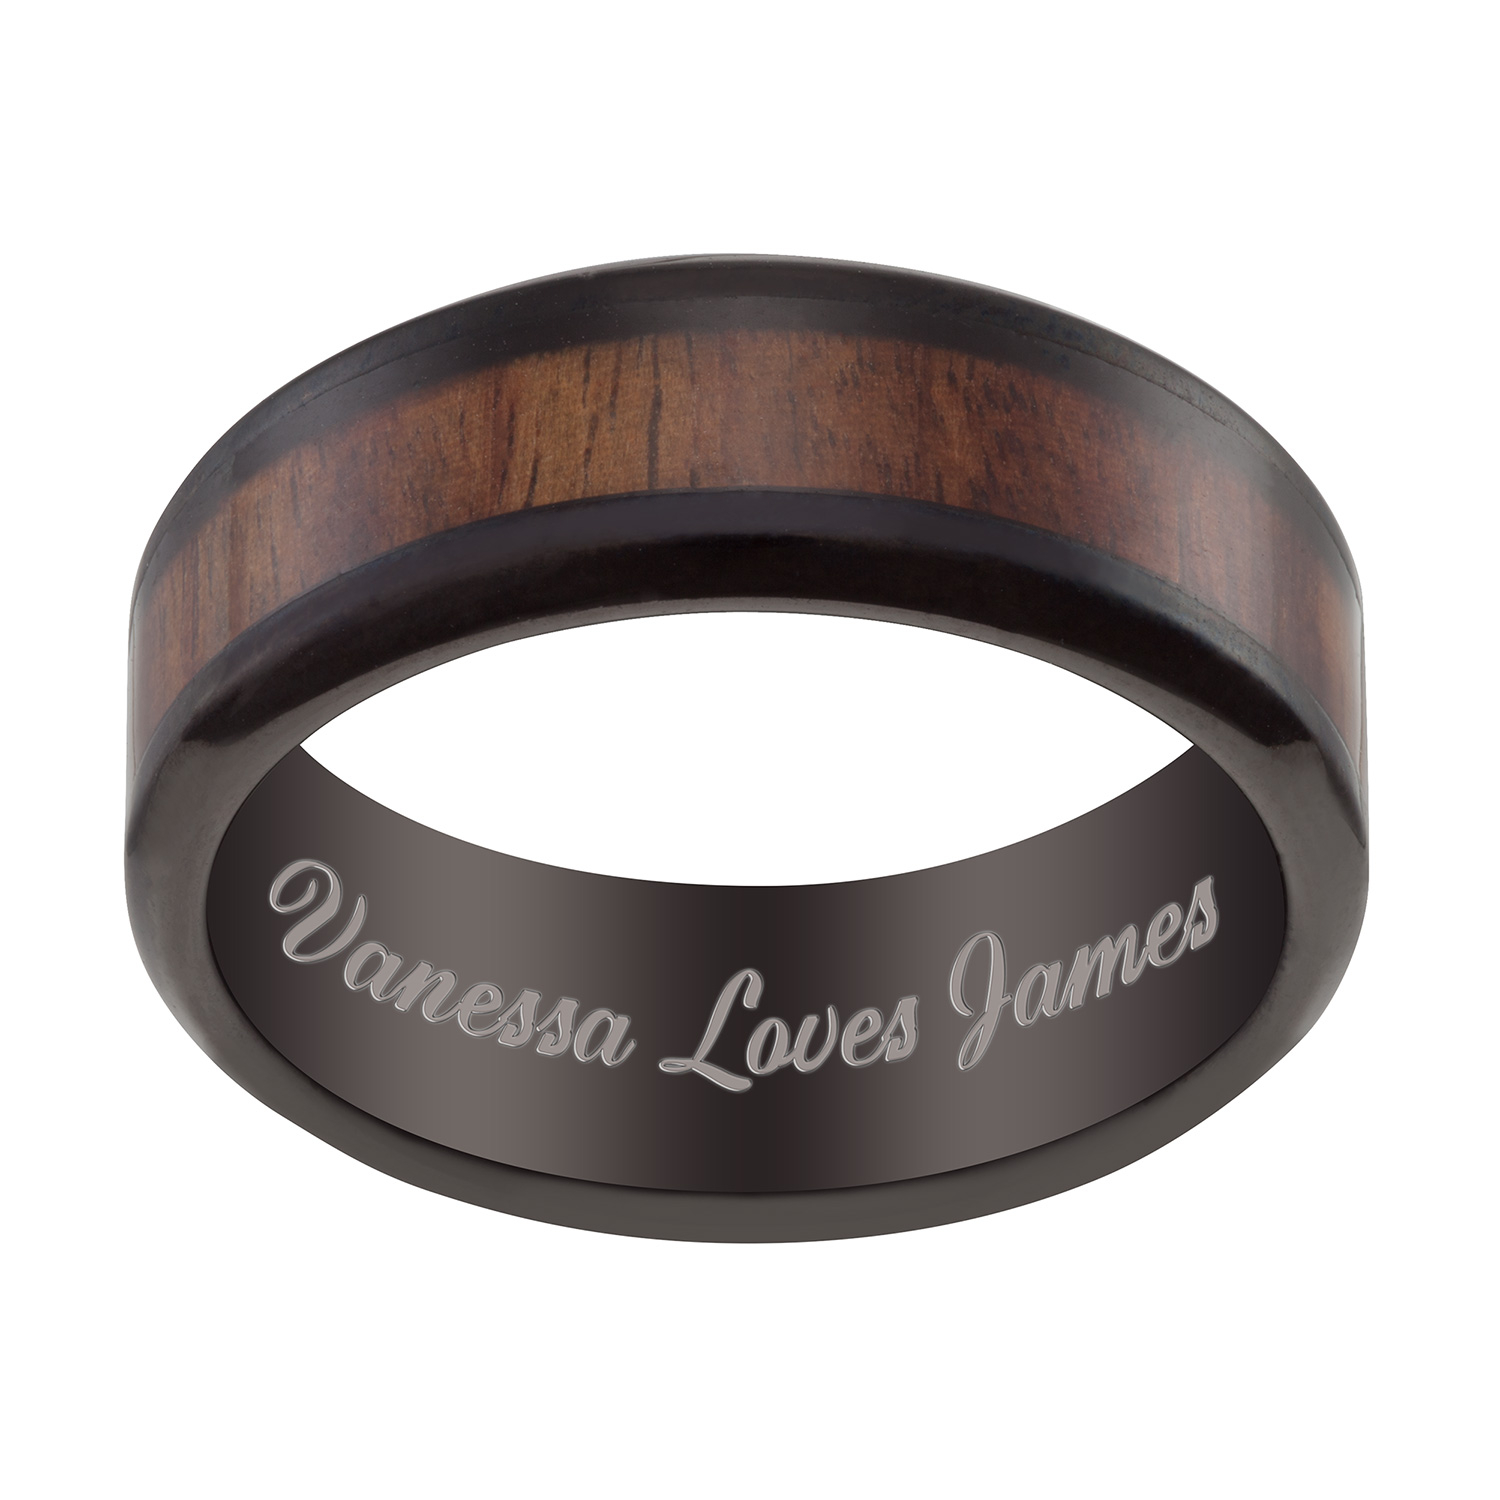 Stainless Steel Men's Engraved Black and Wood Beveled Band